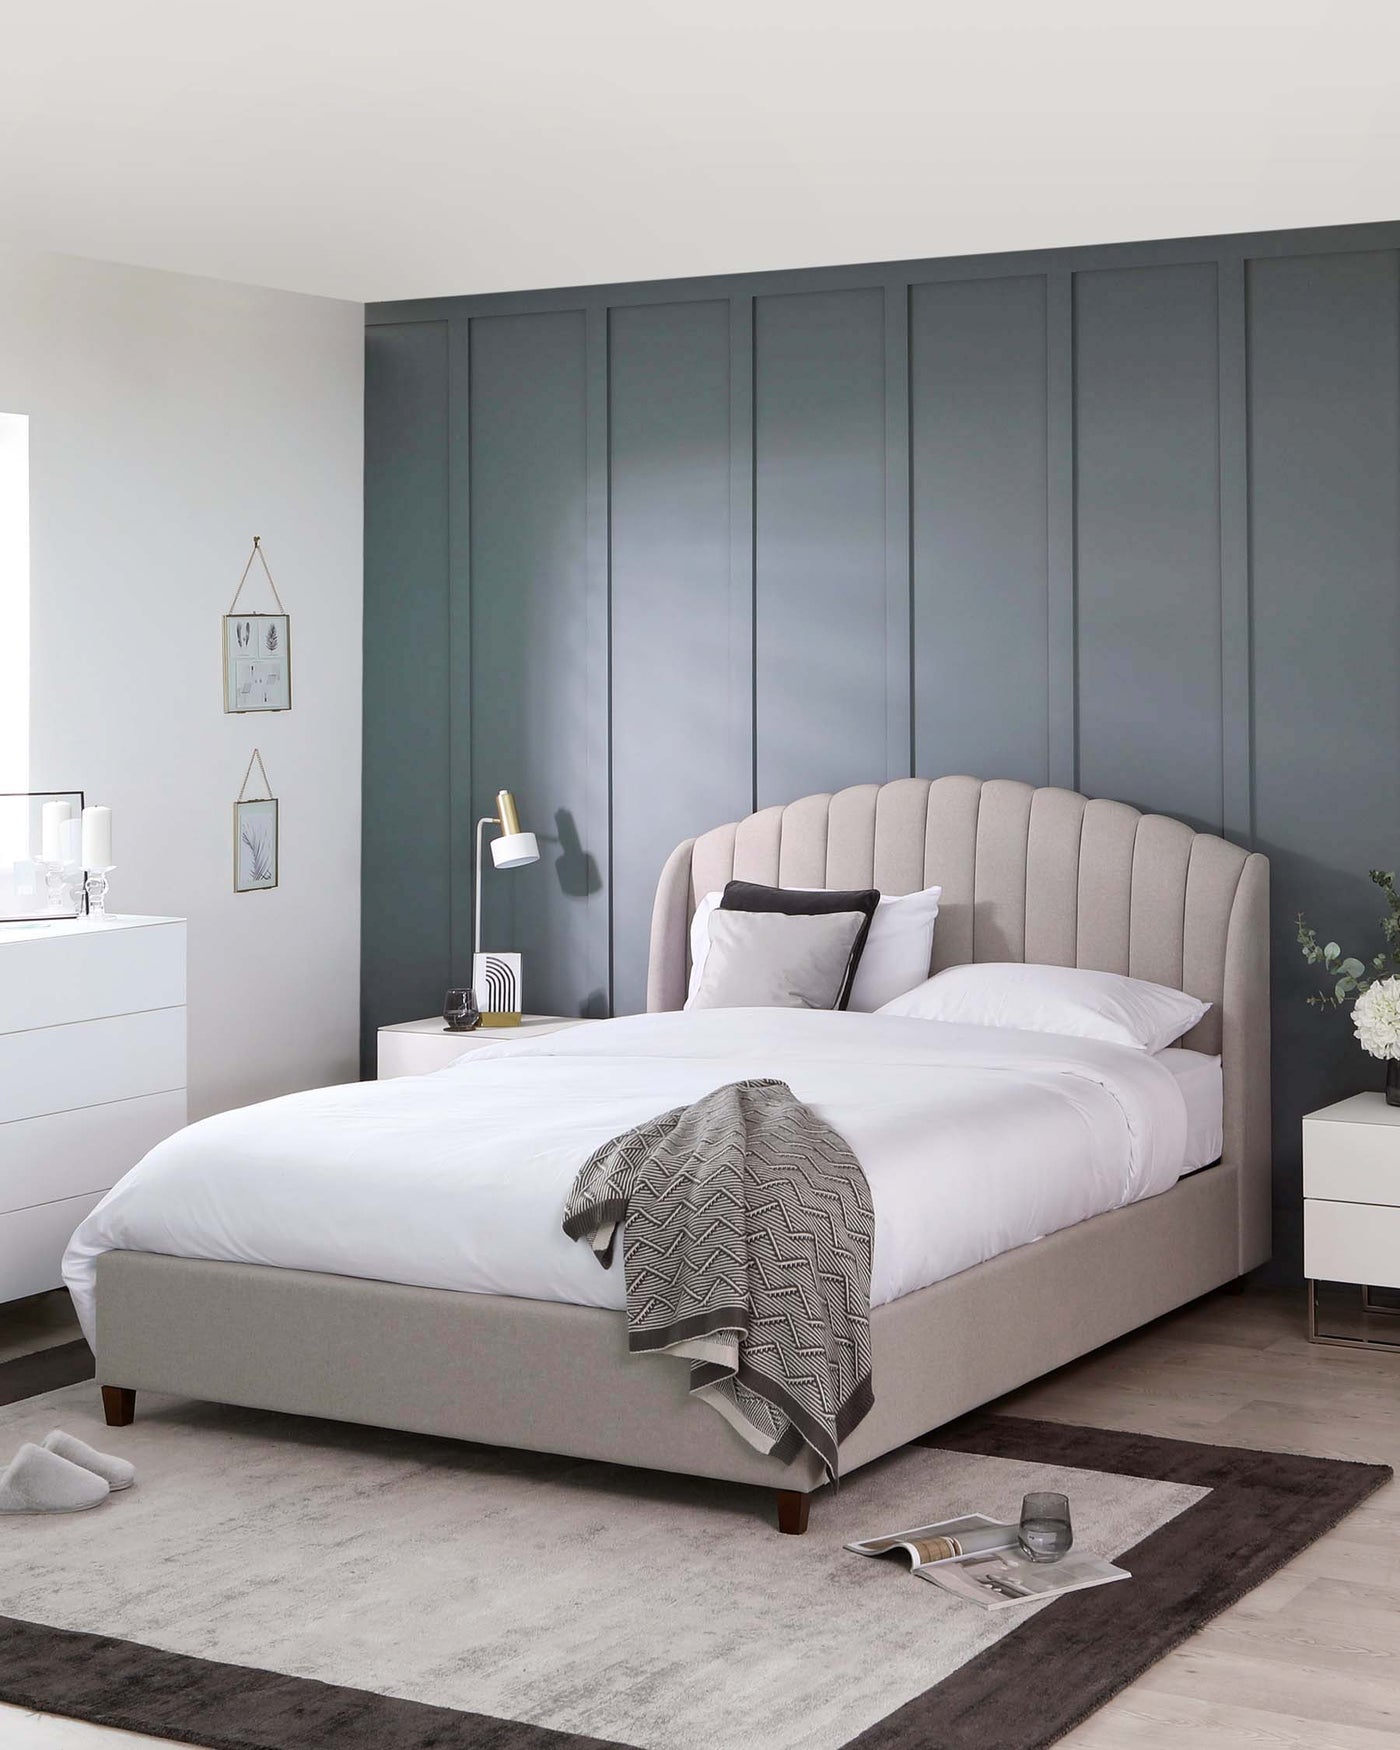 Elegant contemporary bedroom furniture featuring a large upholstered bed with a gently curved headboard and a soft grey finish, accompanied by a sleek white bedside table and matching white dresser with clean lines and minimalistic handles. A plush area rug adds texture to the space, complementing the simple, modern aesthetic.